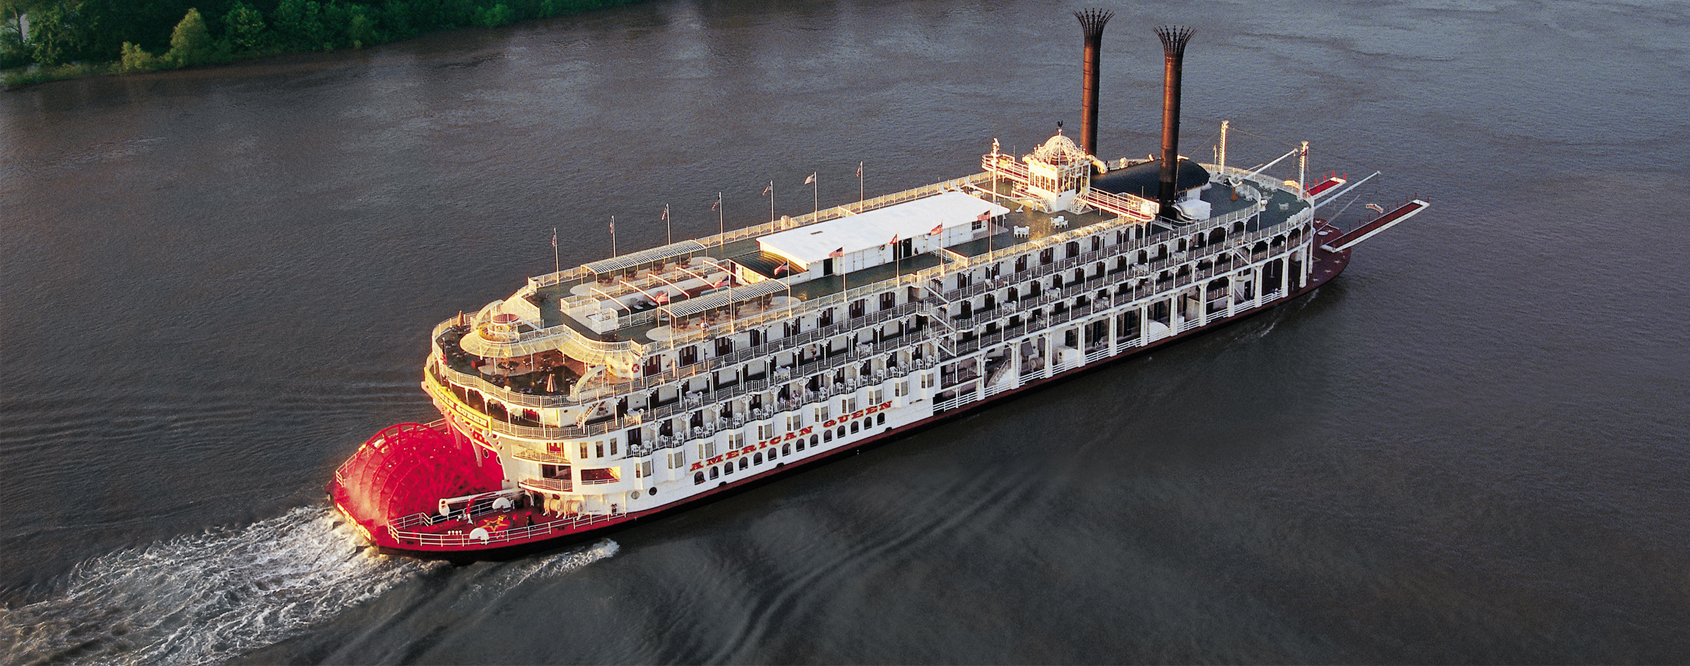 American Queen Voyages Main Image